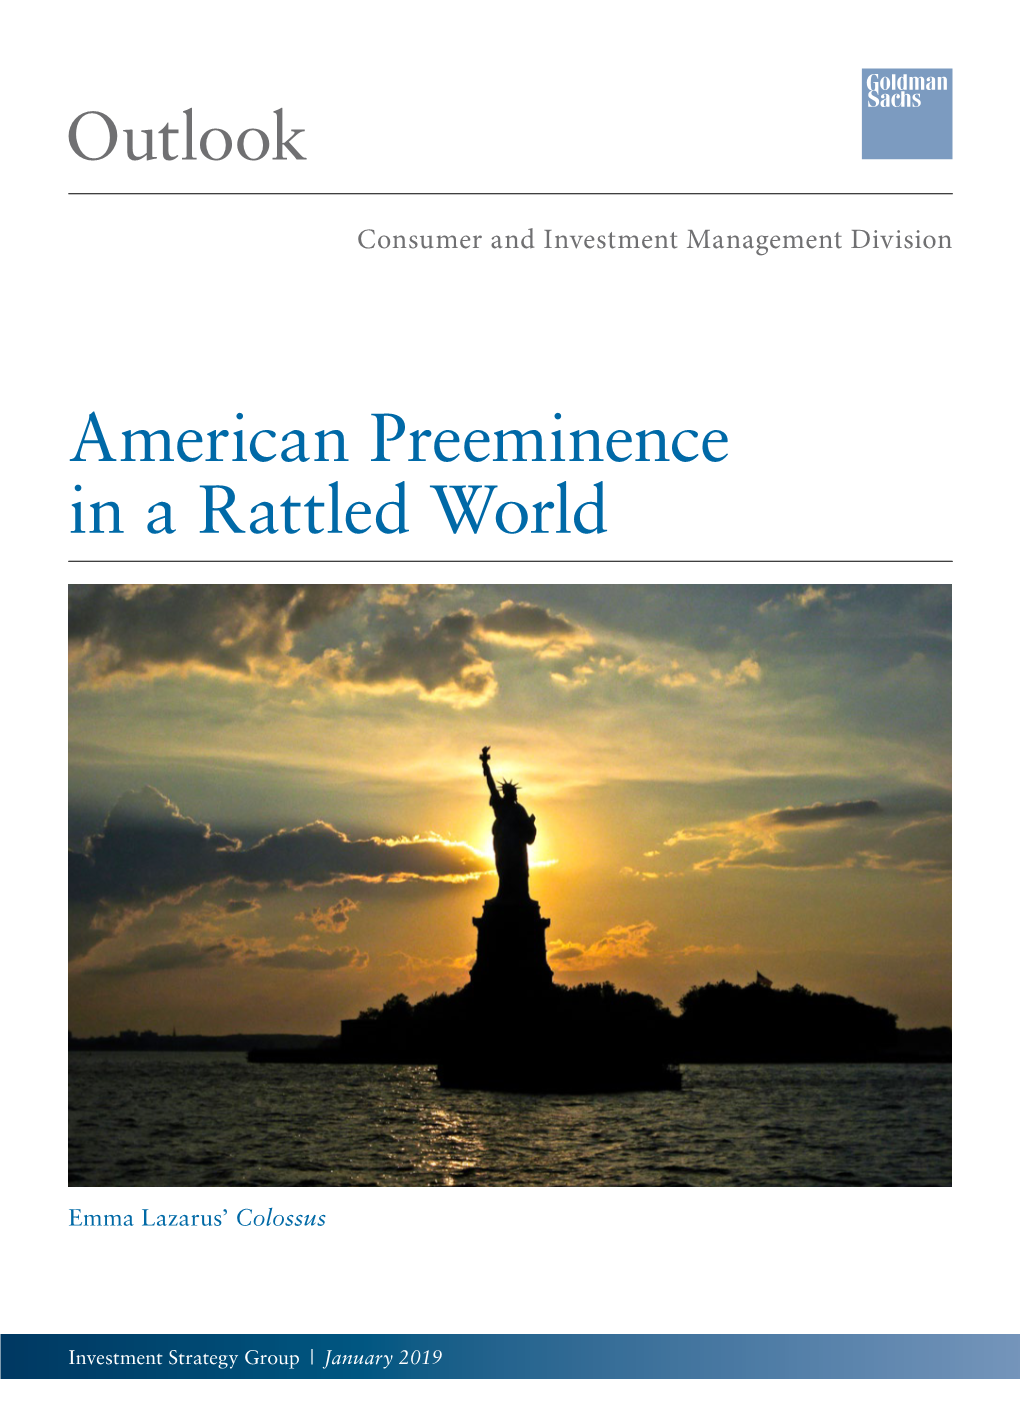 Outlook American Preeminence in a Rattled World